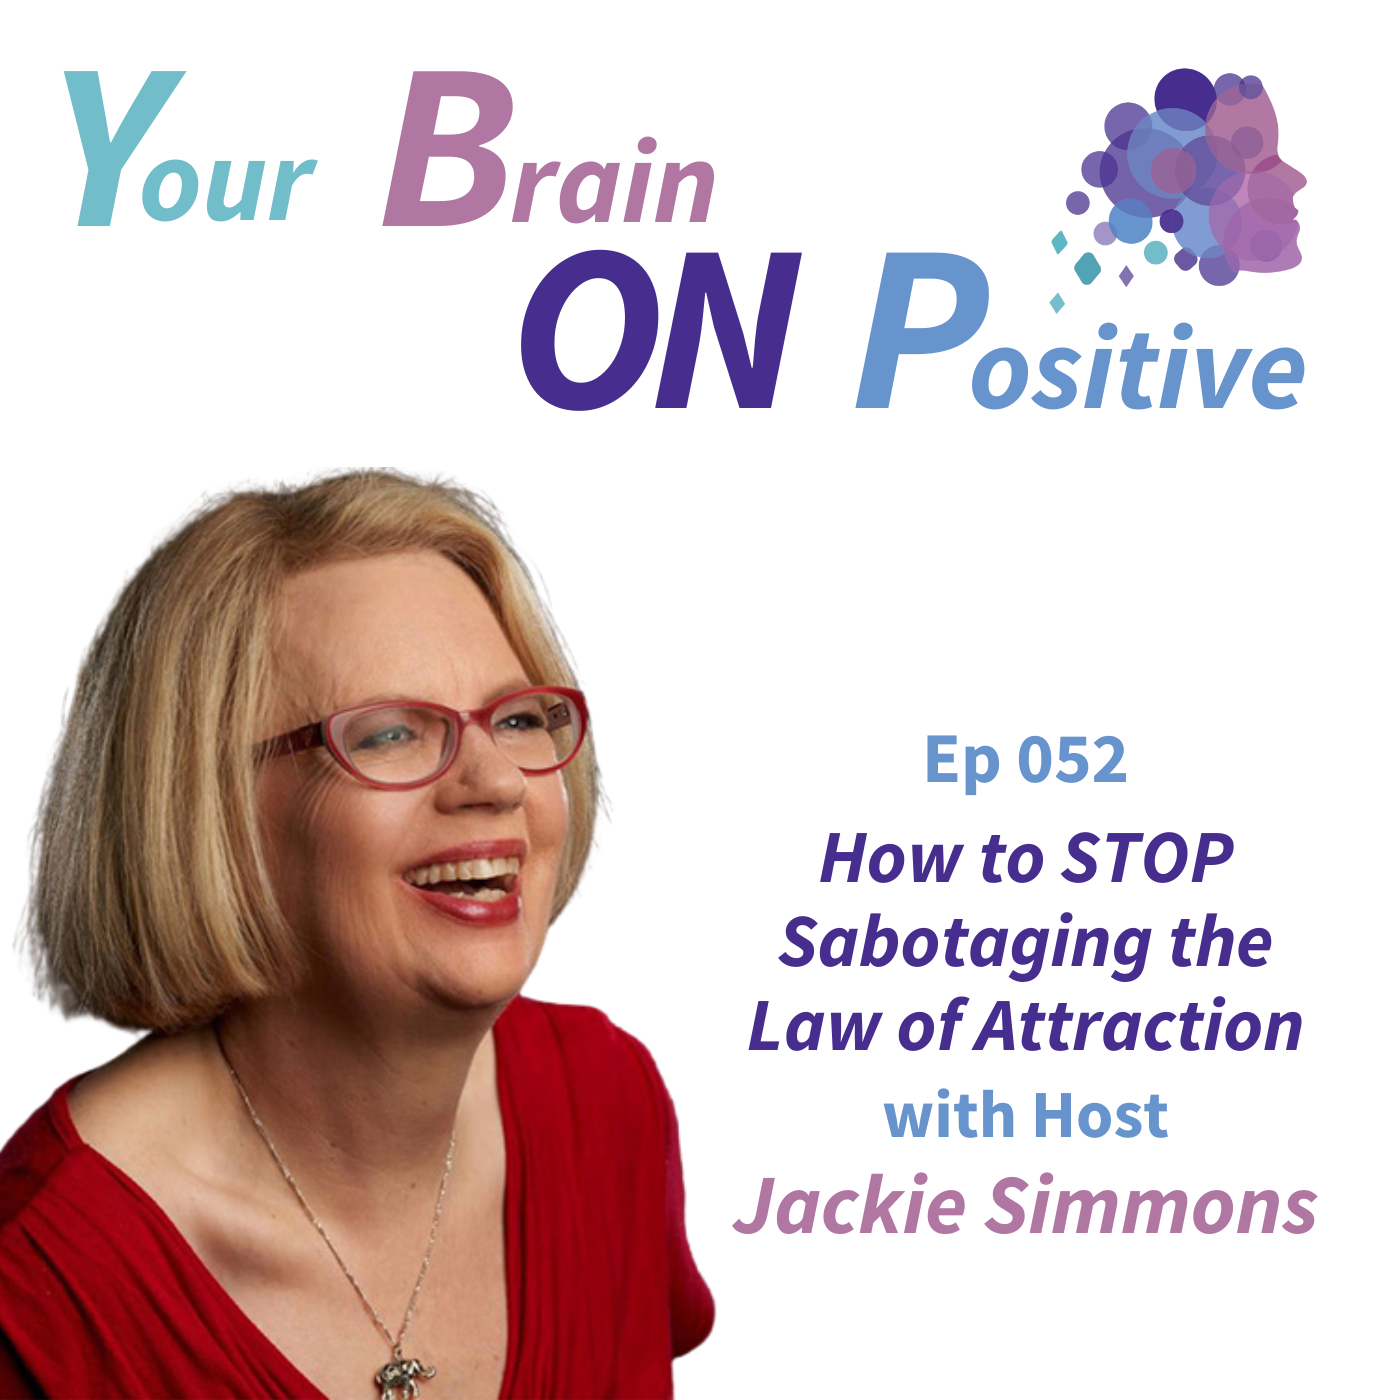 How to STOP Sabotaging the Law of Attraction - Jackie Simmons